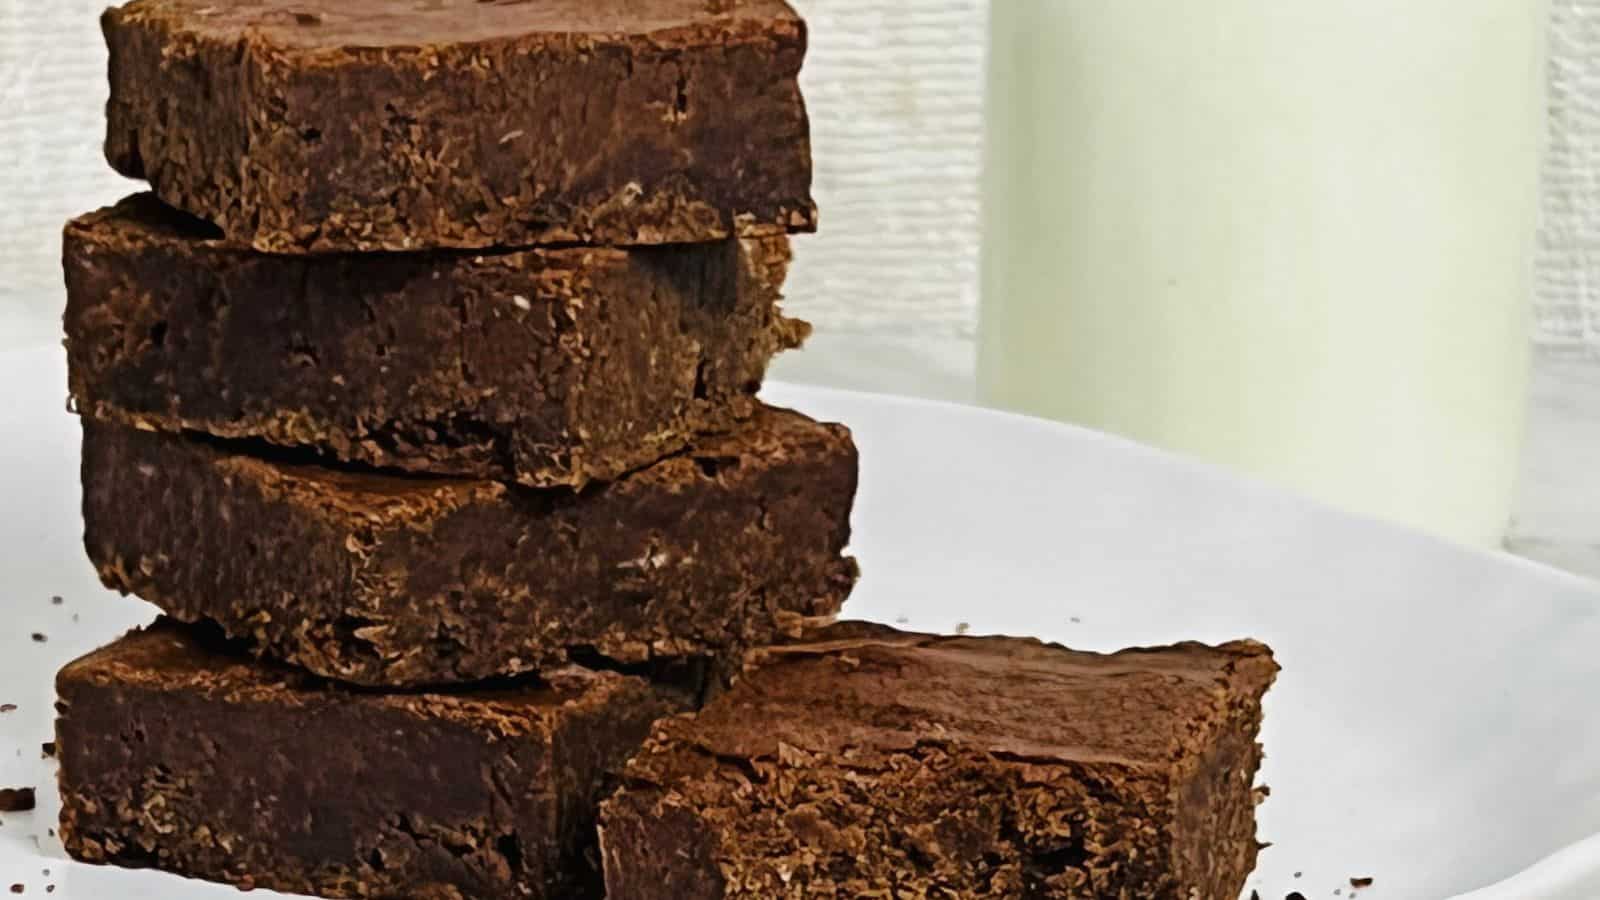 A stack of rich, fudgy brownies on a white plate, accompanied by a glass of milk in the background.